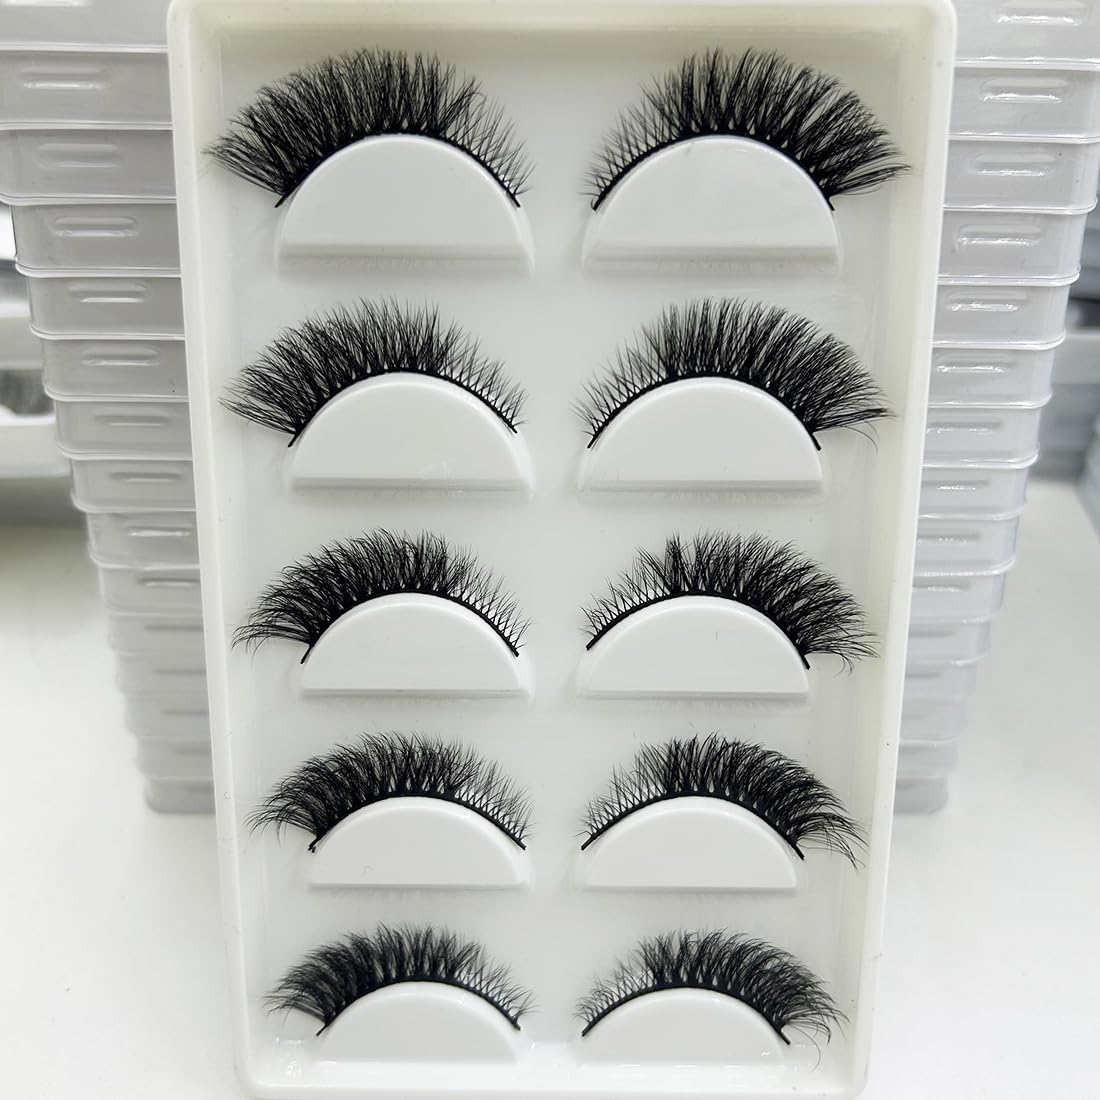 FULIMEI 16 Stil 5 0/100 Paar dicke Wimpern natürliche falsche Wimpern weiche gefälschte Wimpern Wispy Make-up Faux (Color : 5 Pairs Nova02, Size : 25Boxes 125Pairs)